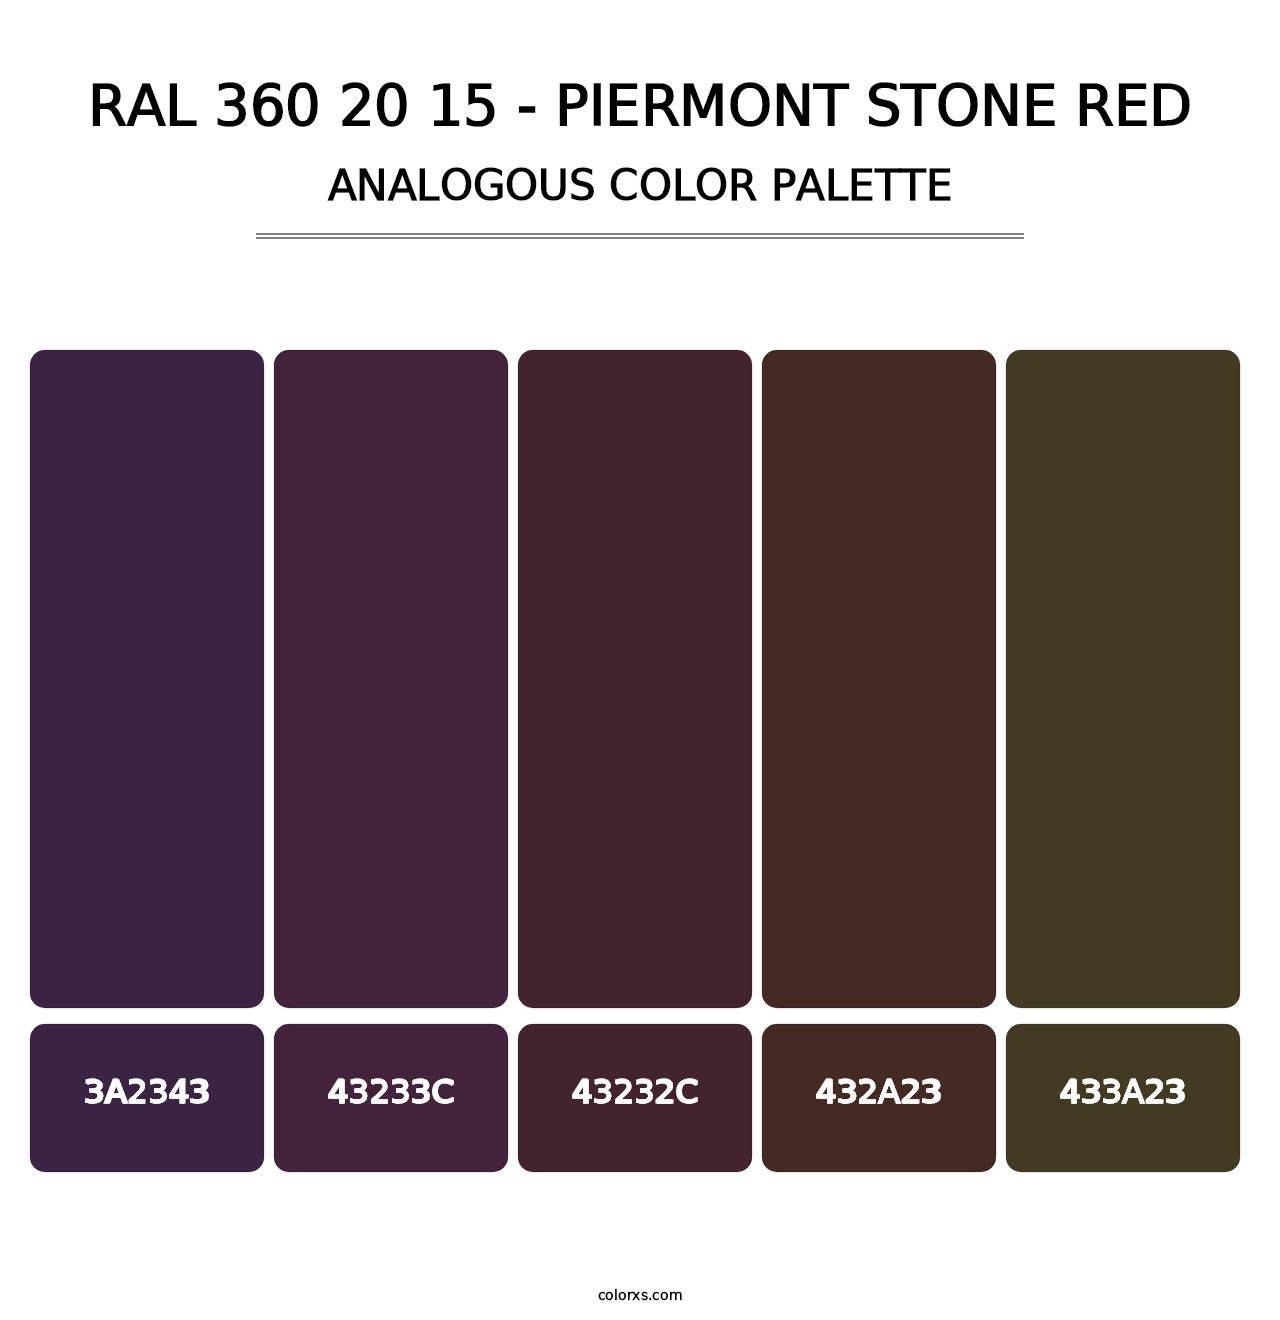 RAL 360 20 15 - Piermont Stone Red - Analogous Color Palette